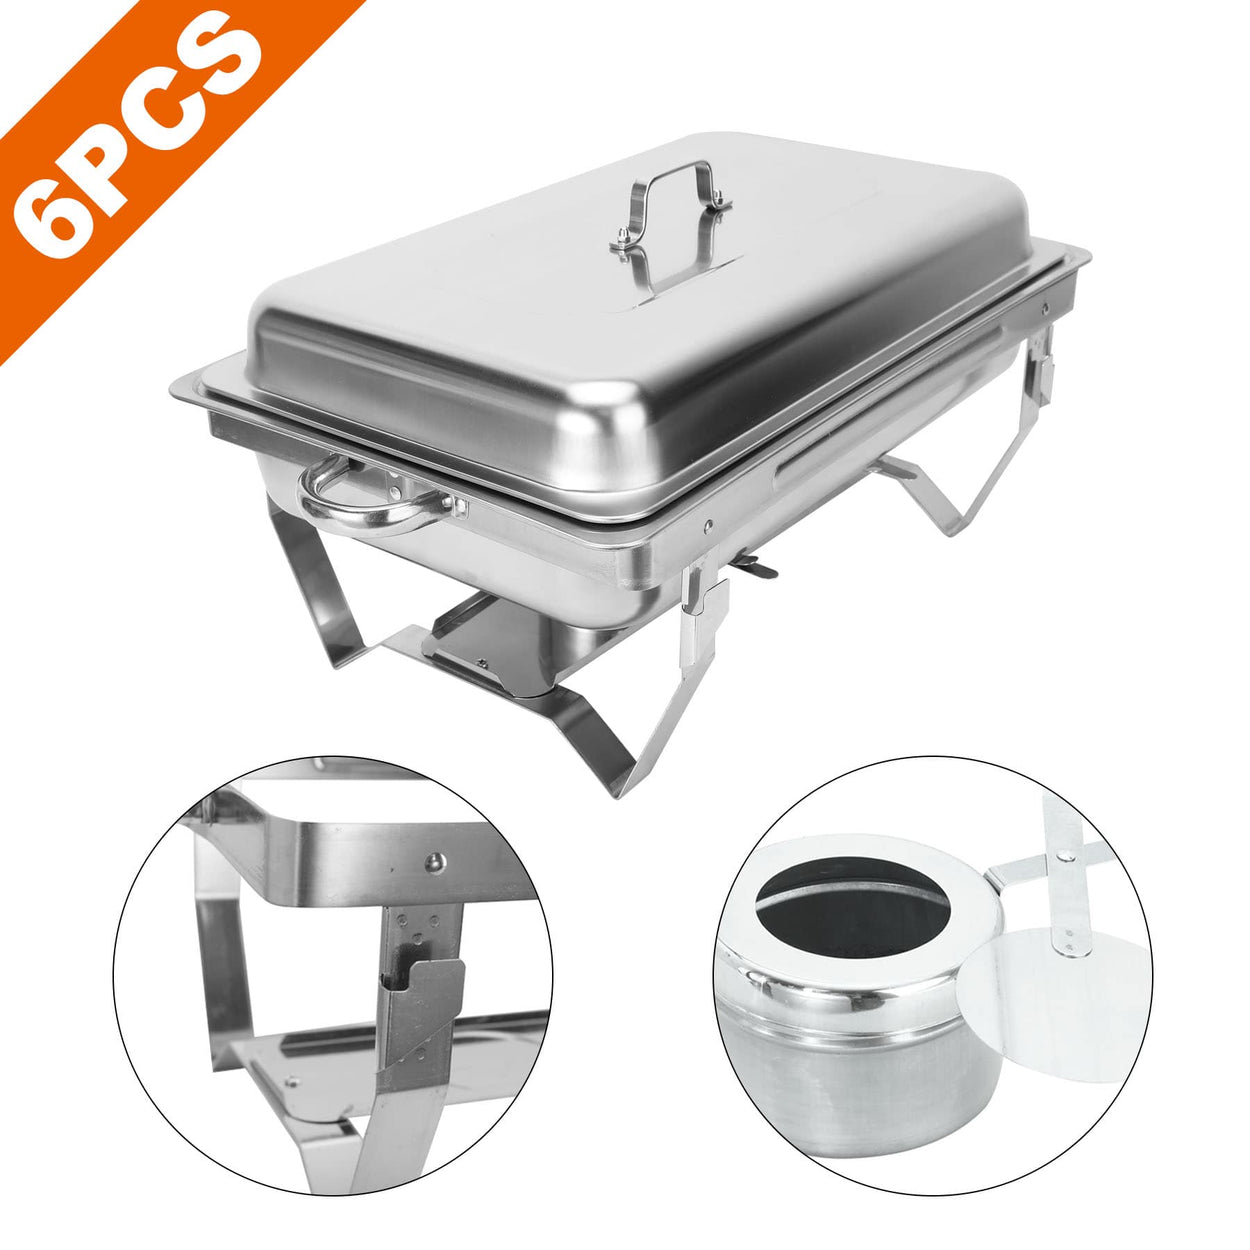 CO-Z 6 Pack Chafer Dish Set 9L/8Q High-Grade Stainless Steel Pans